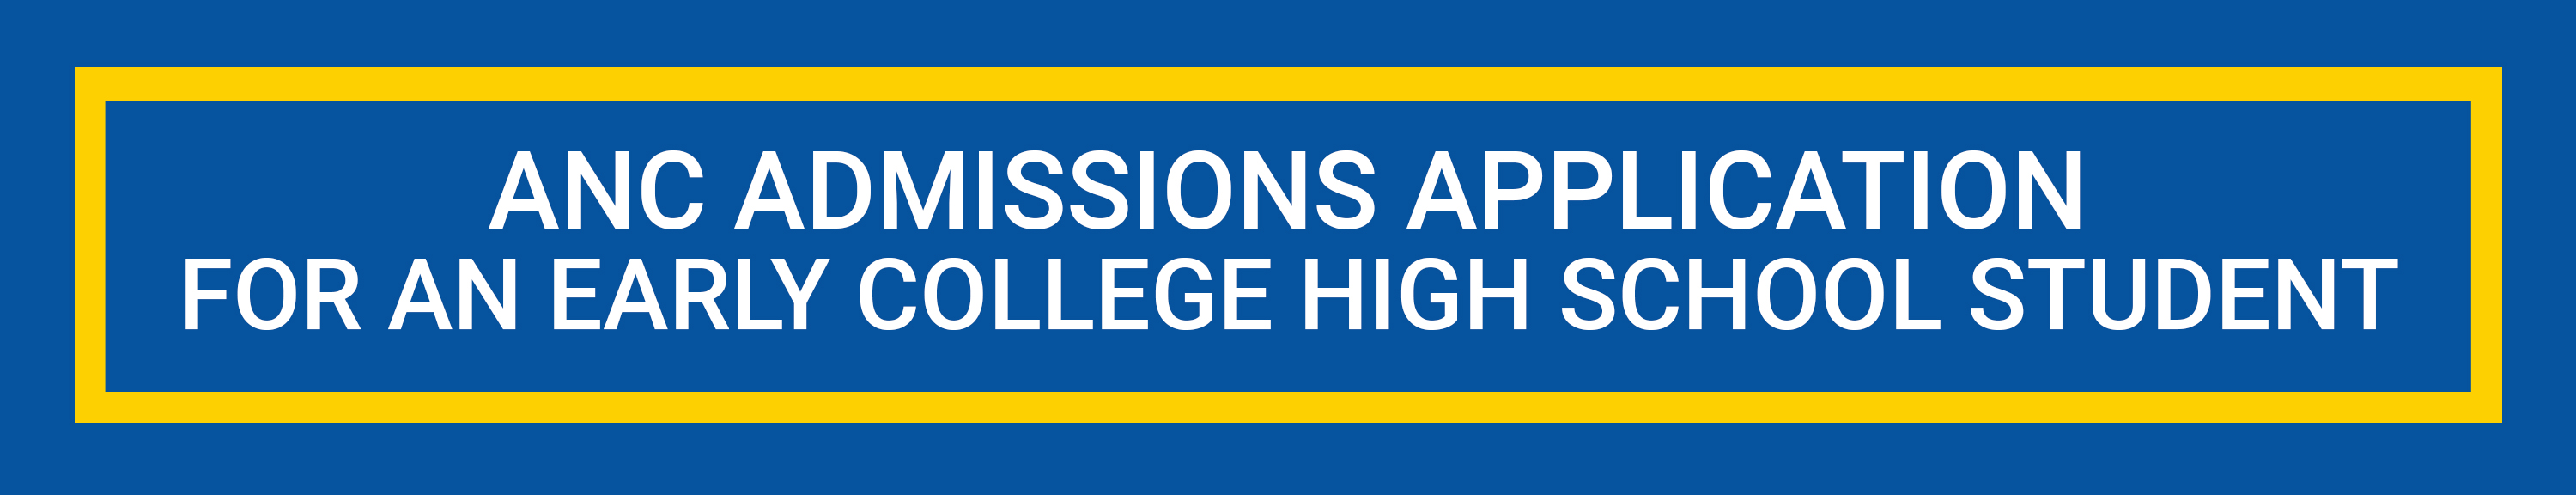 ANC Admission Application - For an Early College High School Student